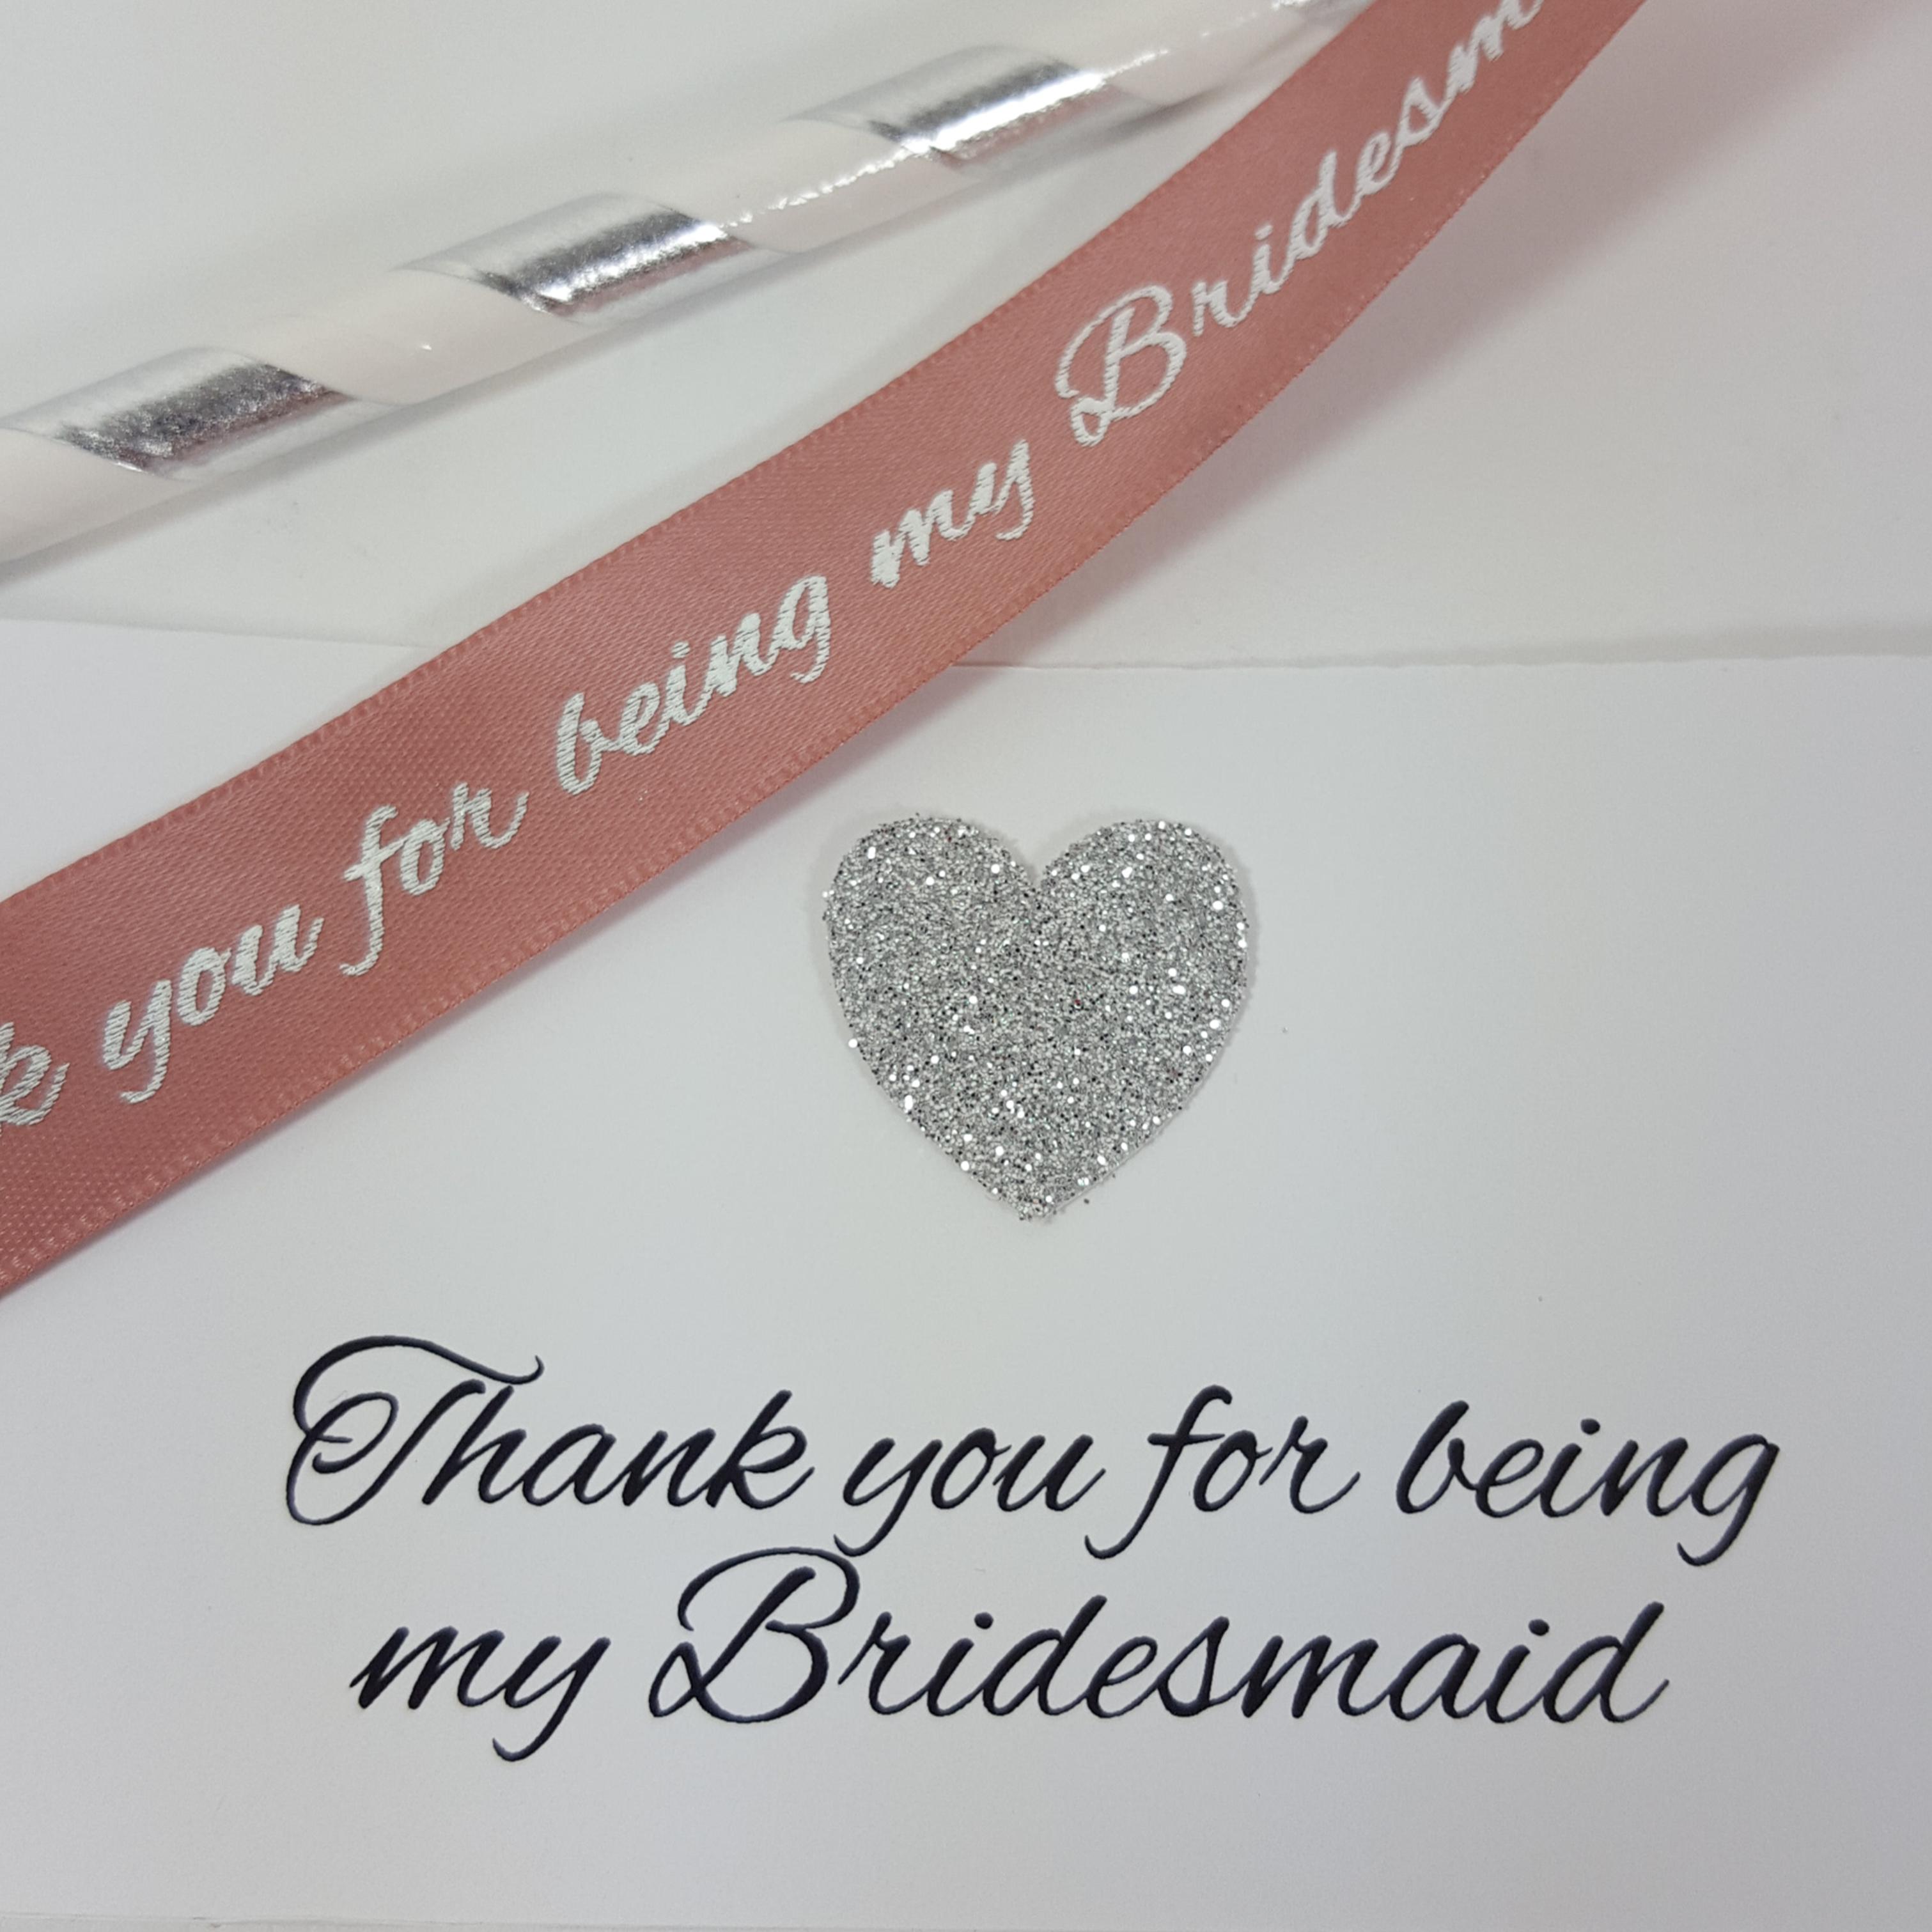 Silver glitter Thank you for being my Bridesmaid Stickers straws and ribbons